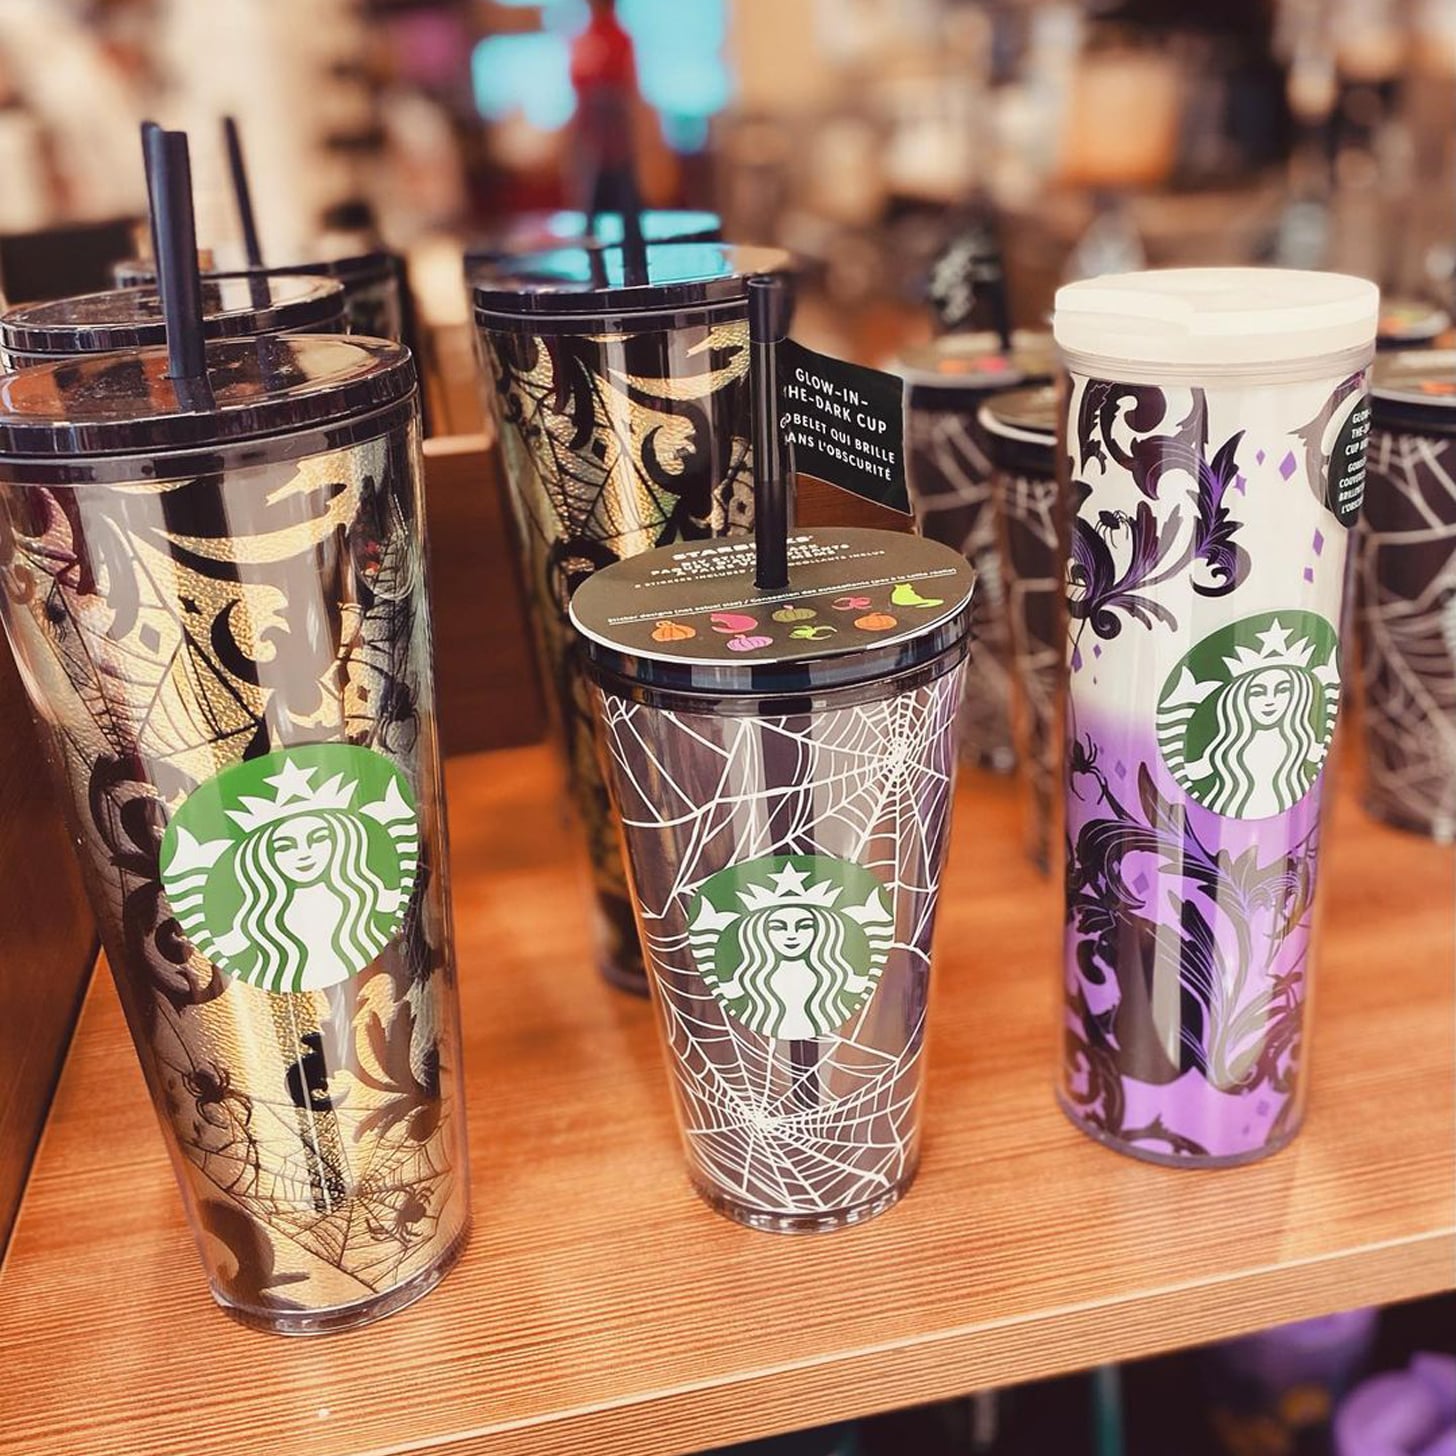 Starbucks with a new cup design for every holiday season